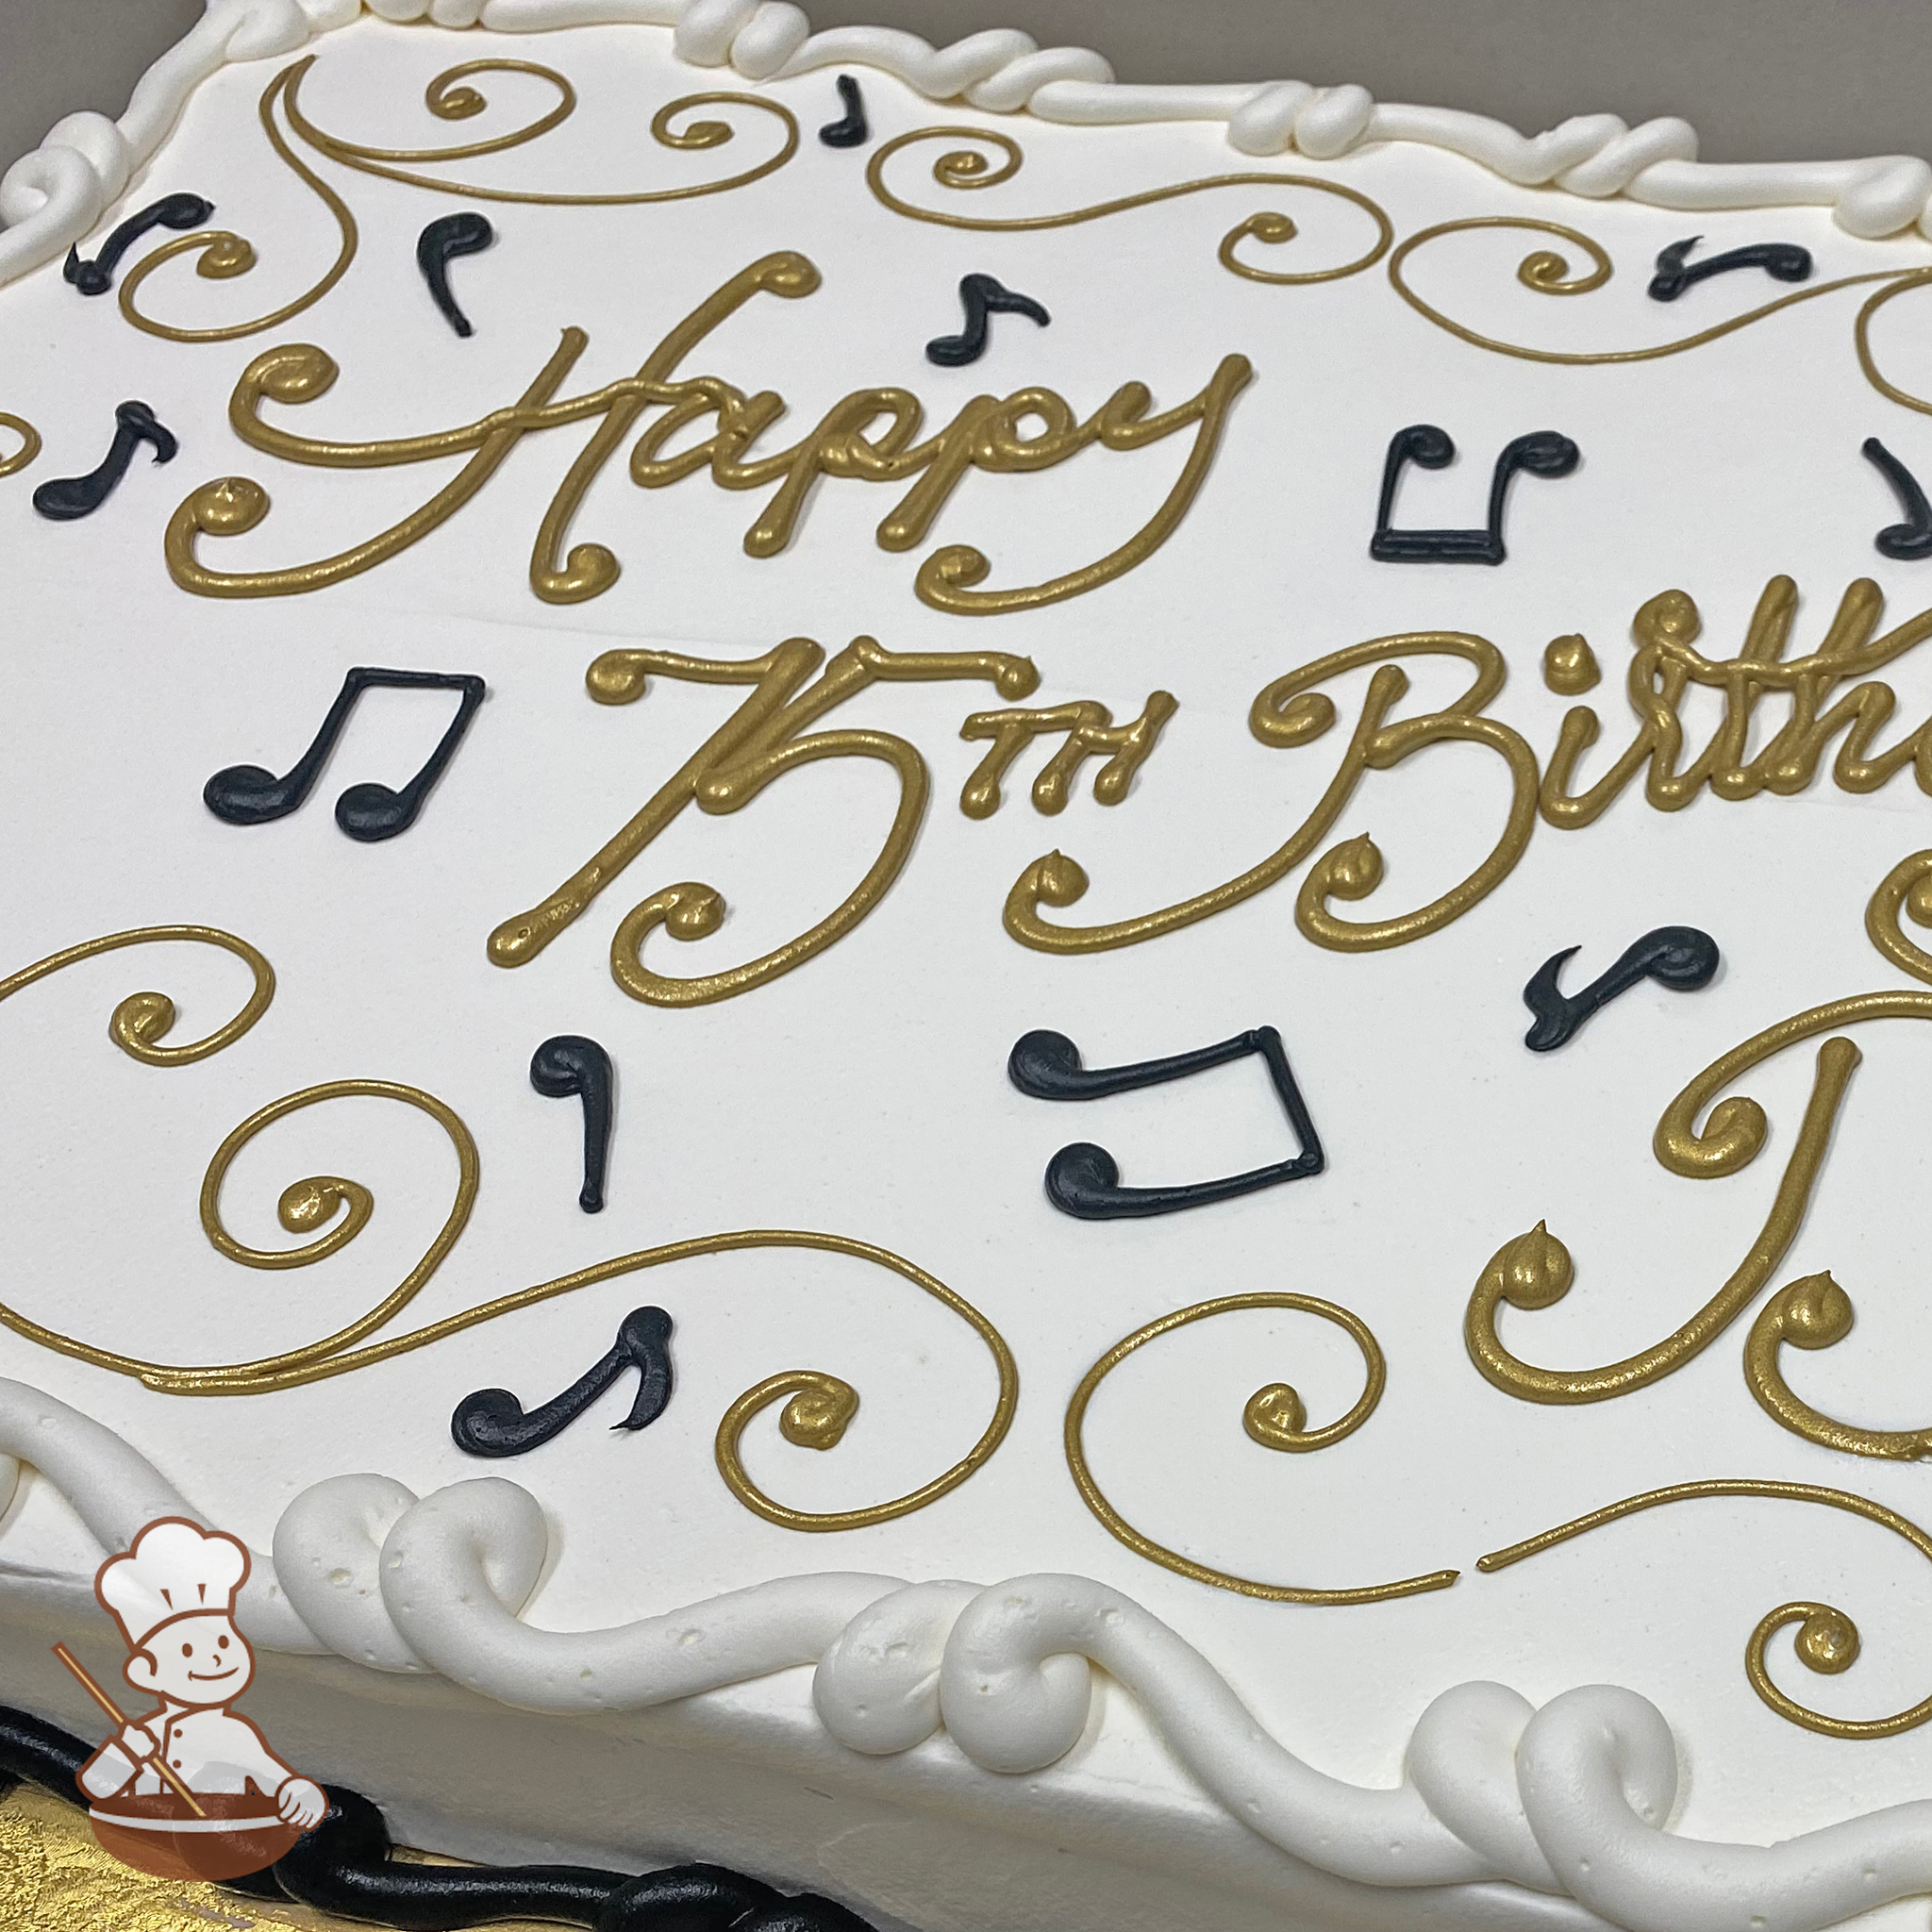 Music Cake Delivery in Sussex | Harry Batten